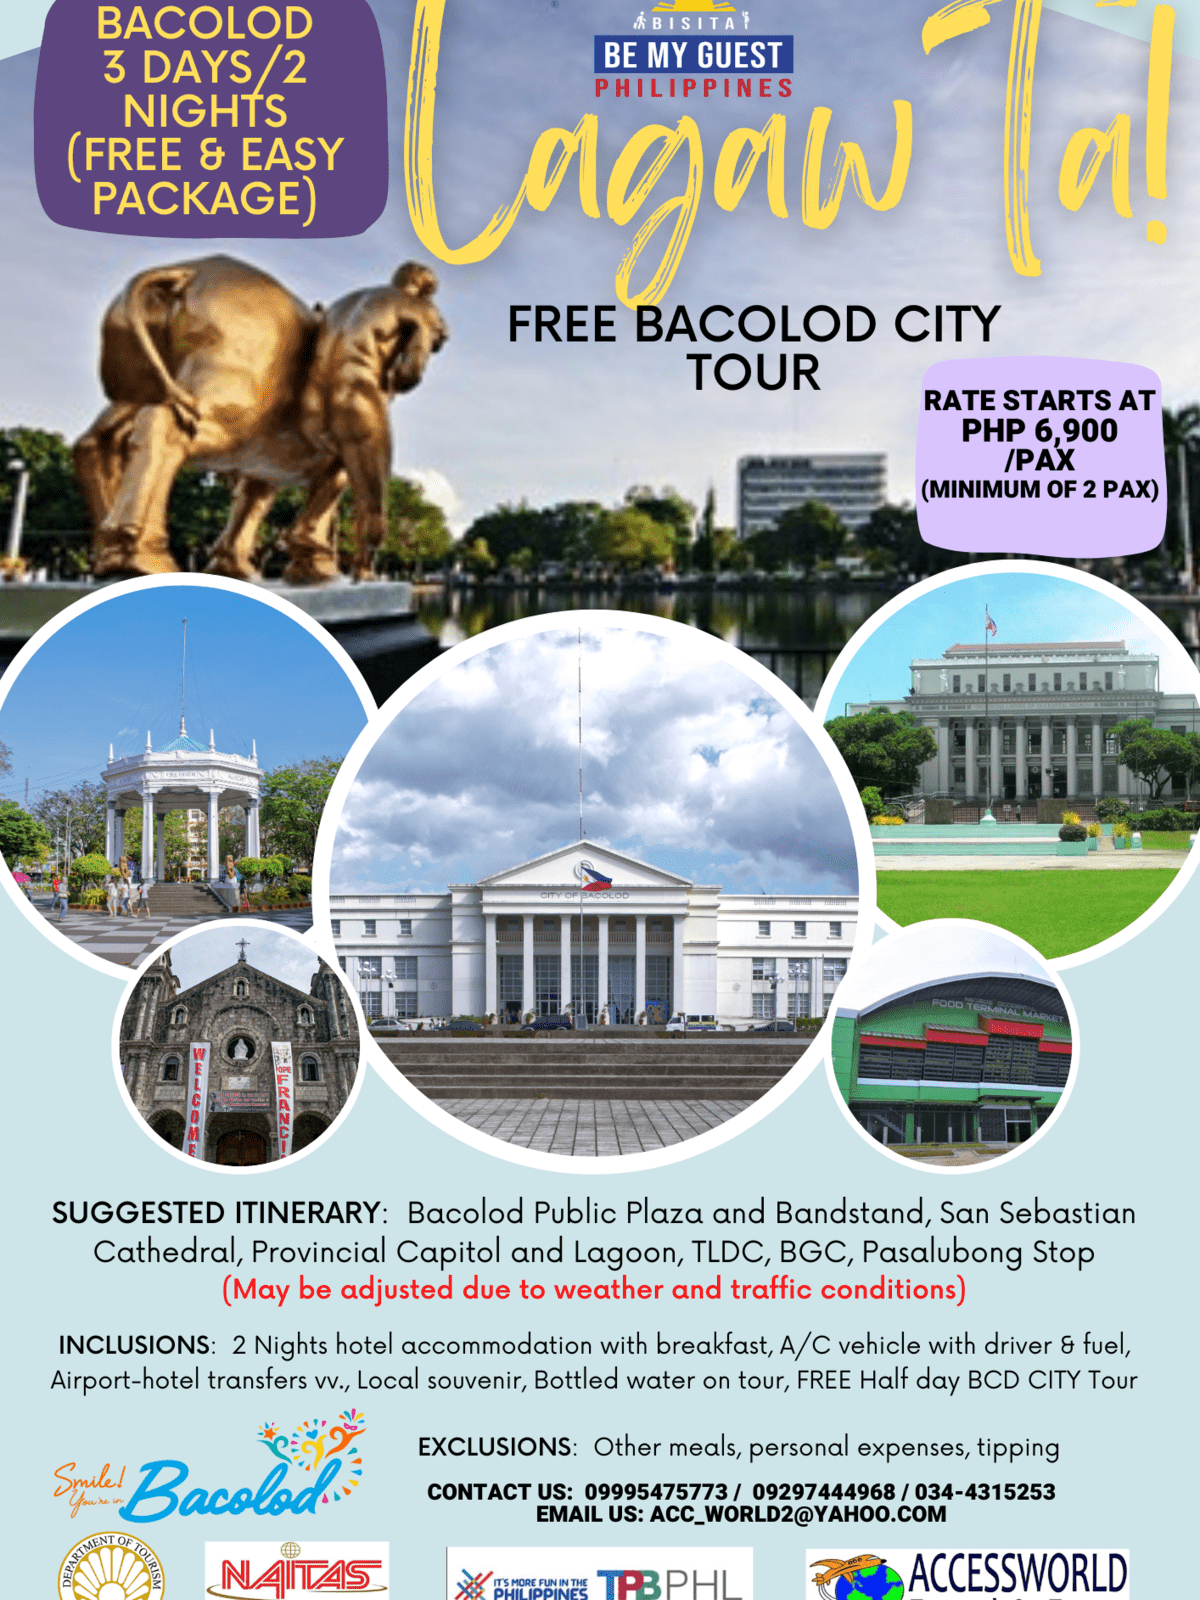 ACCESSWORLD TRAVEL AND TOURS-BACOLOD